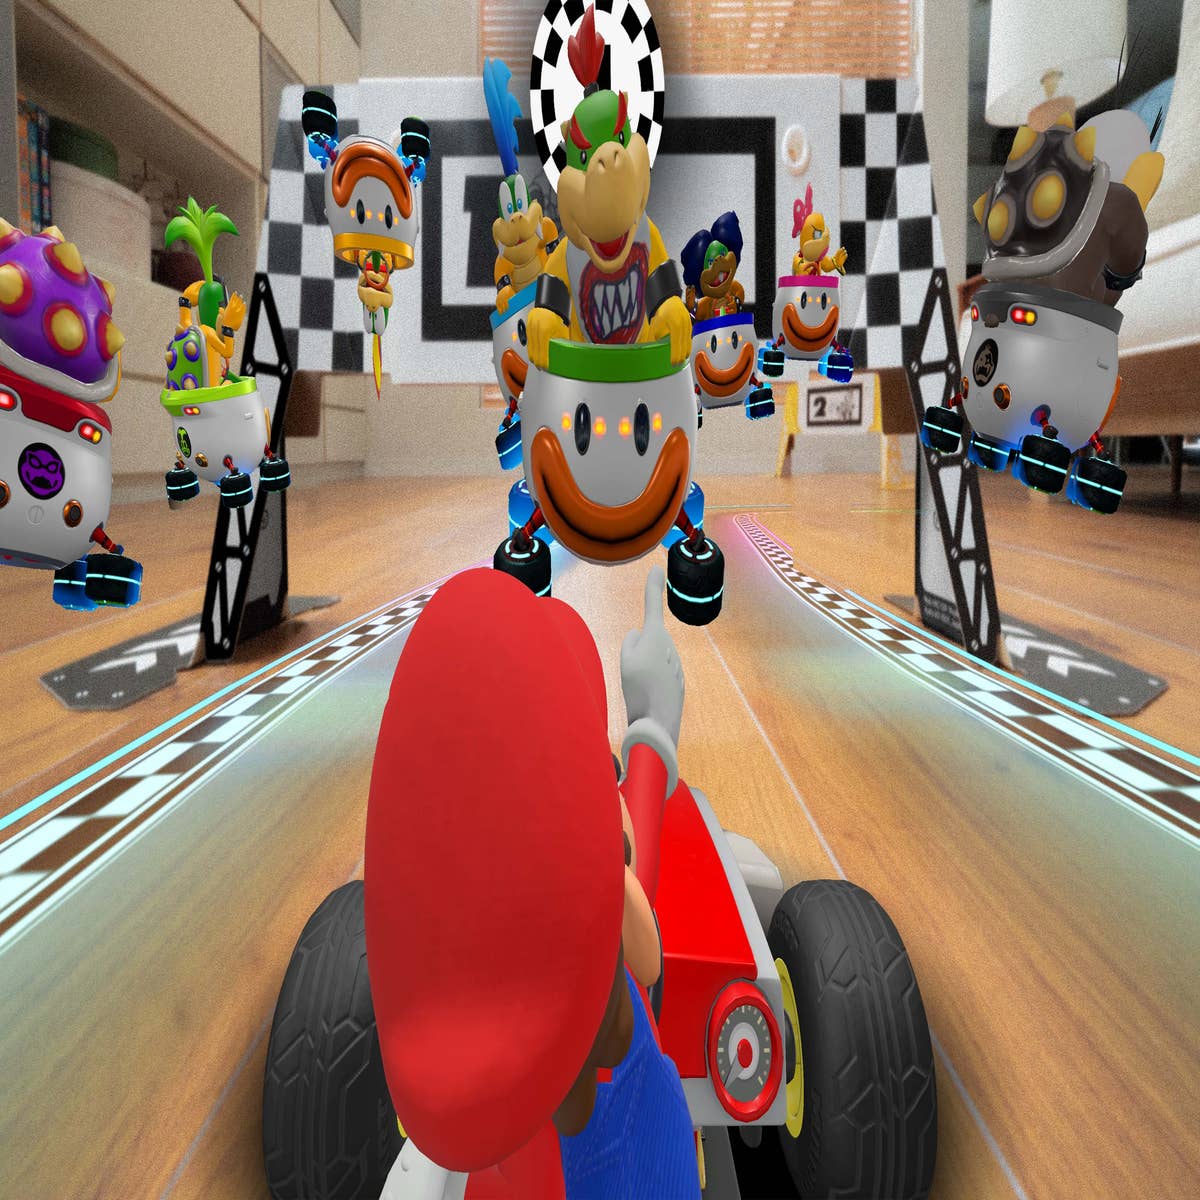 Mario Kart Live Home Circuit Review: Unique and magical